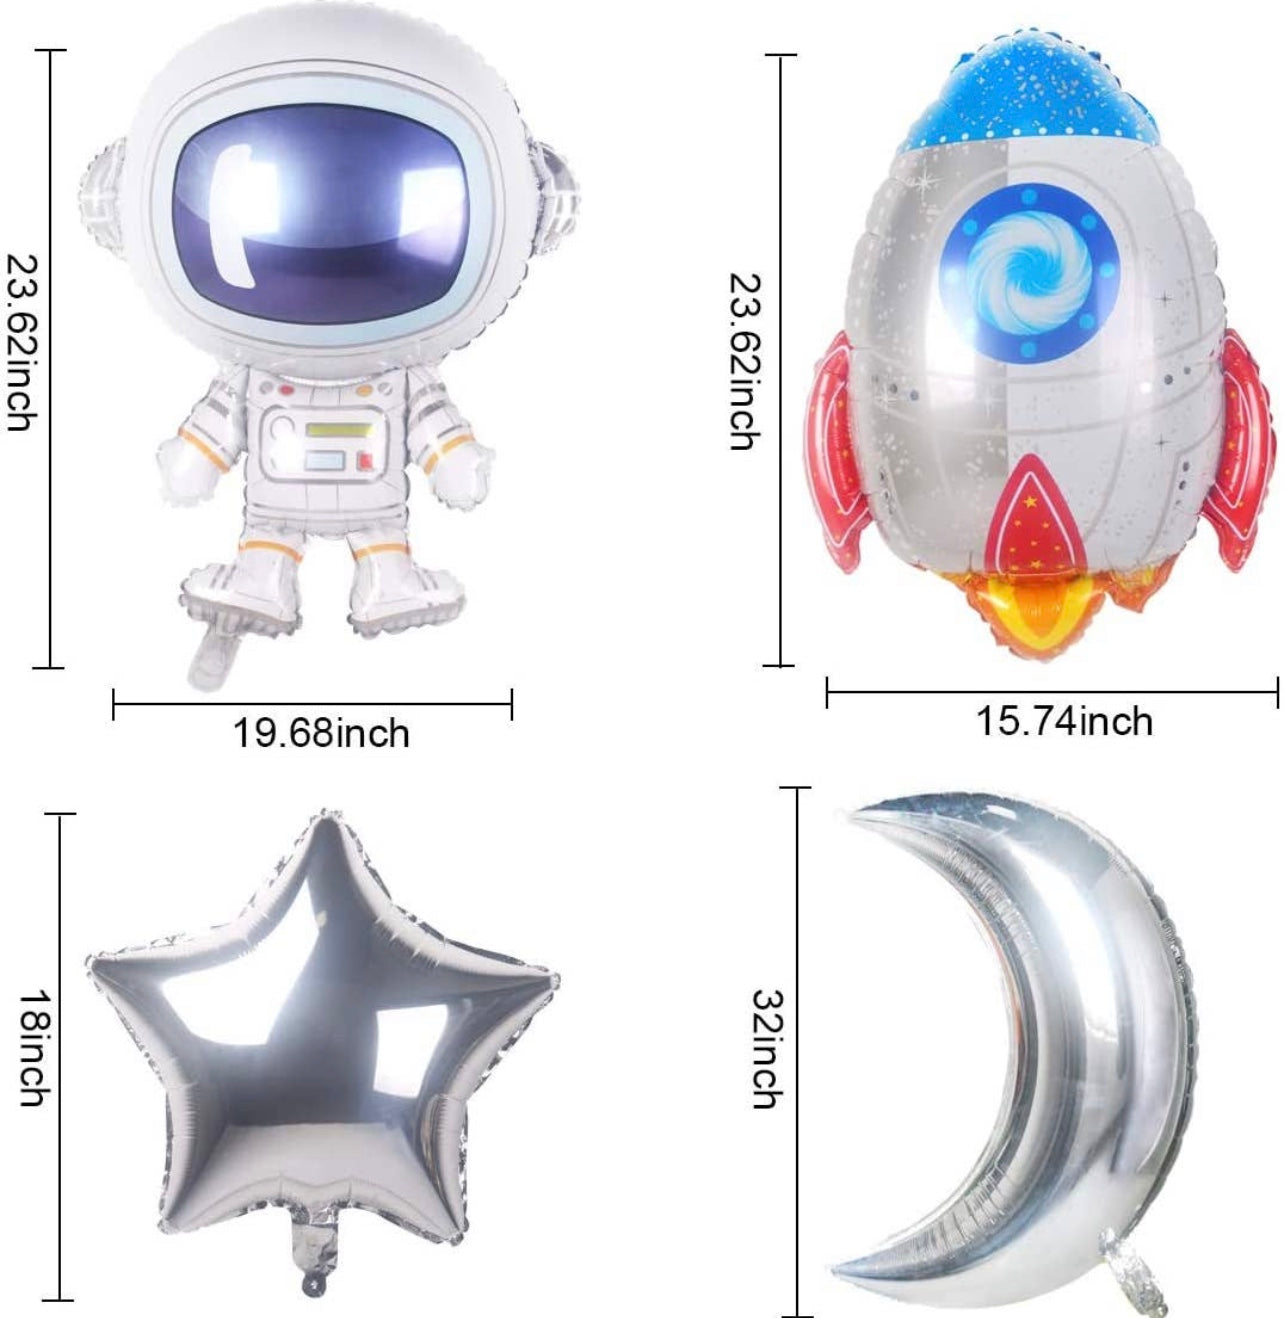 Out of this World Balloon Decoration Kit - 89 Pieces!